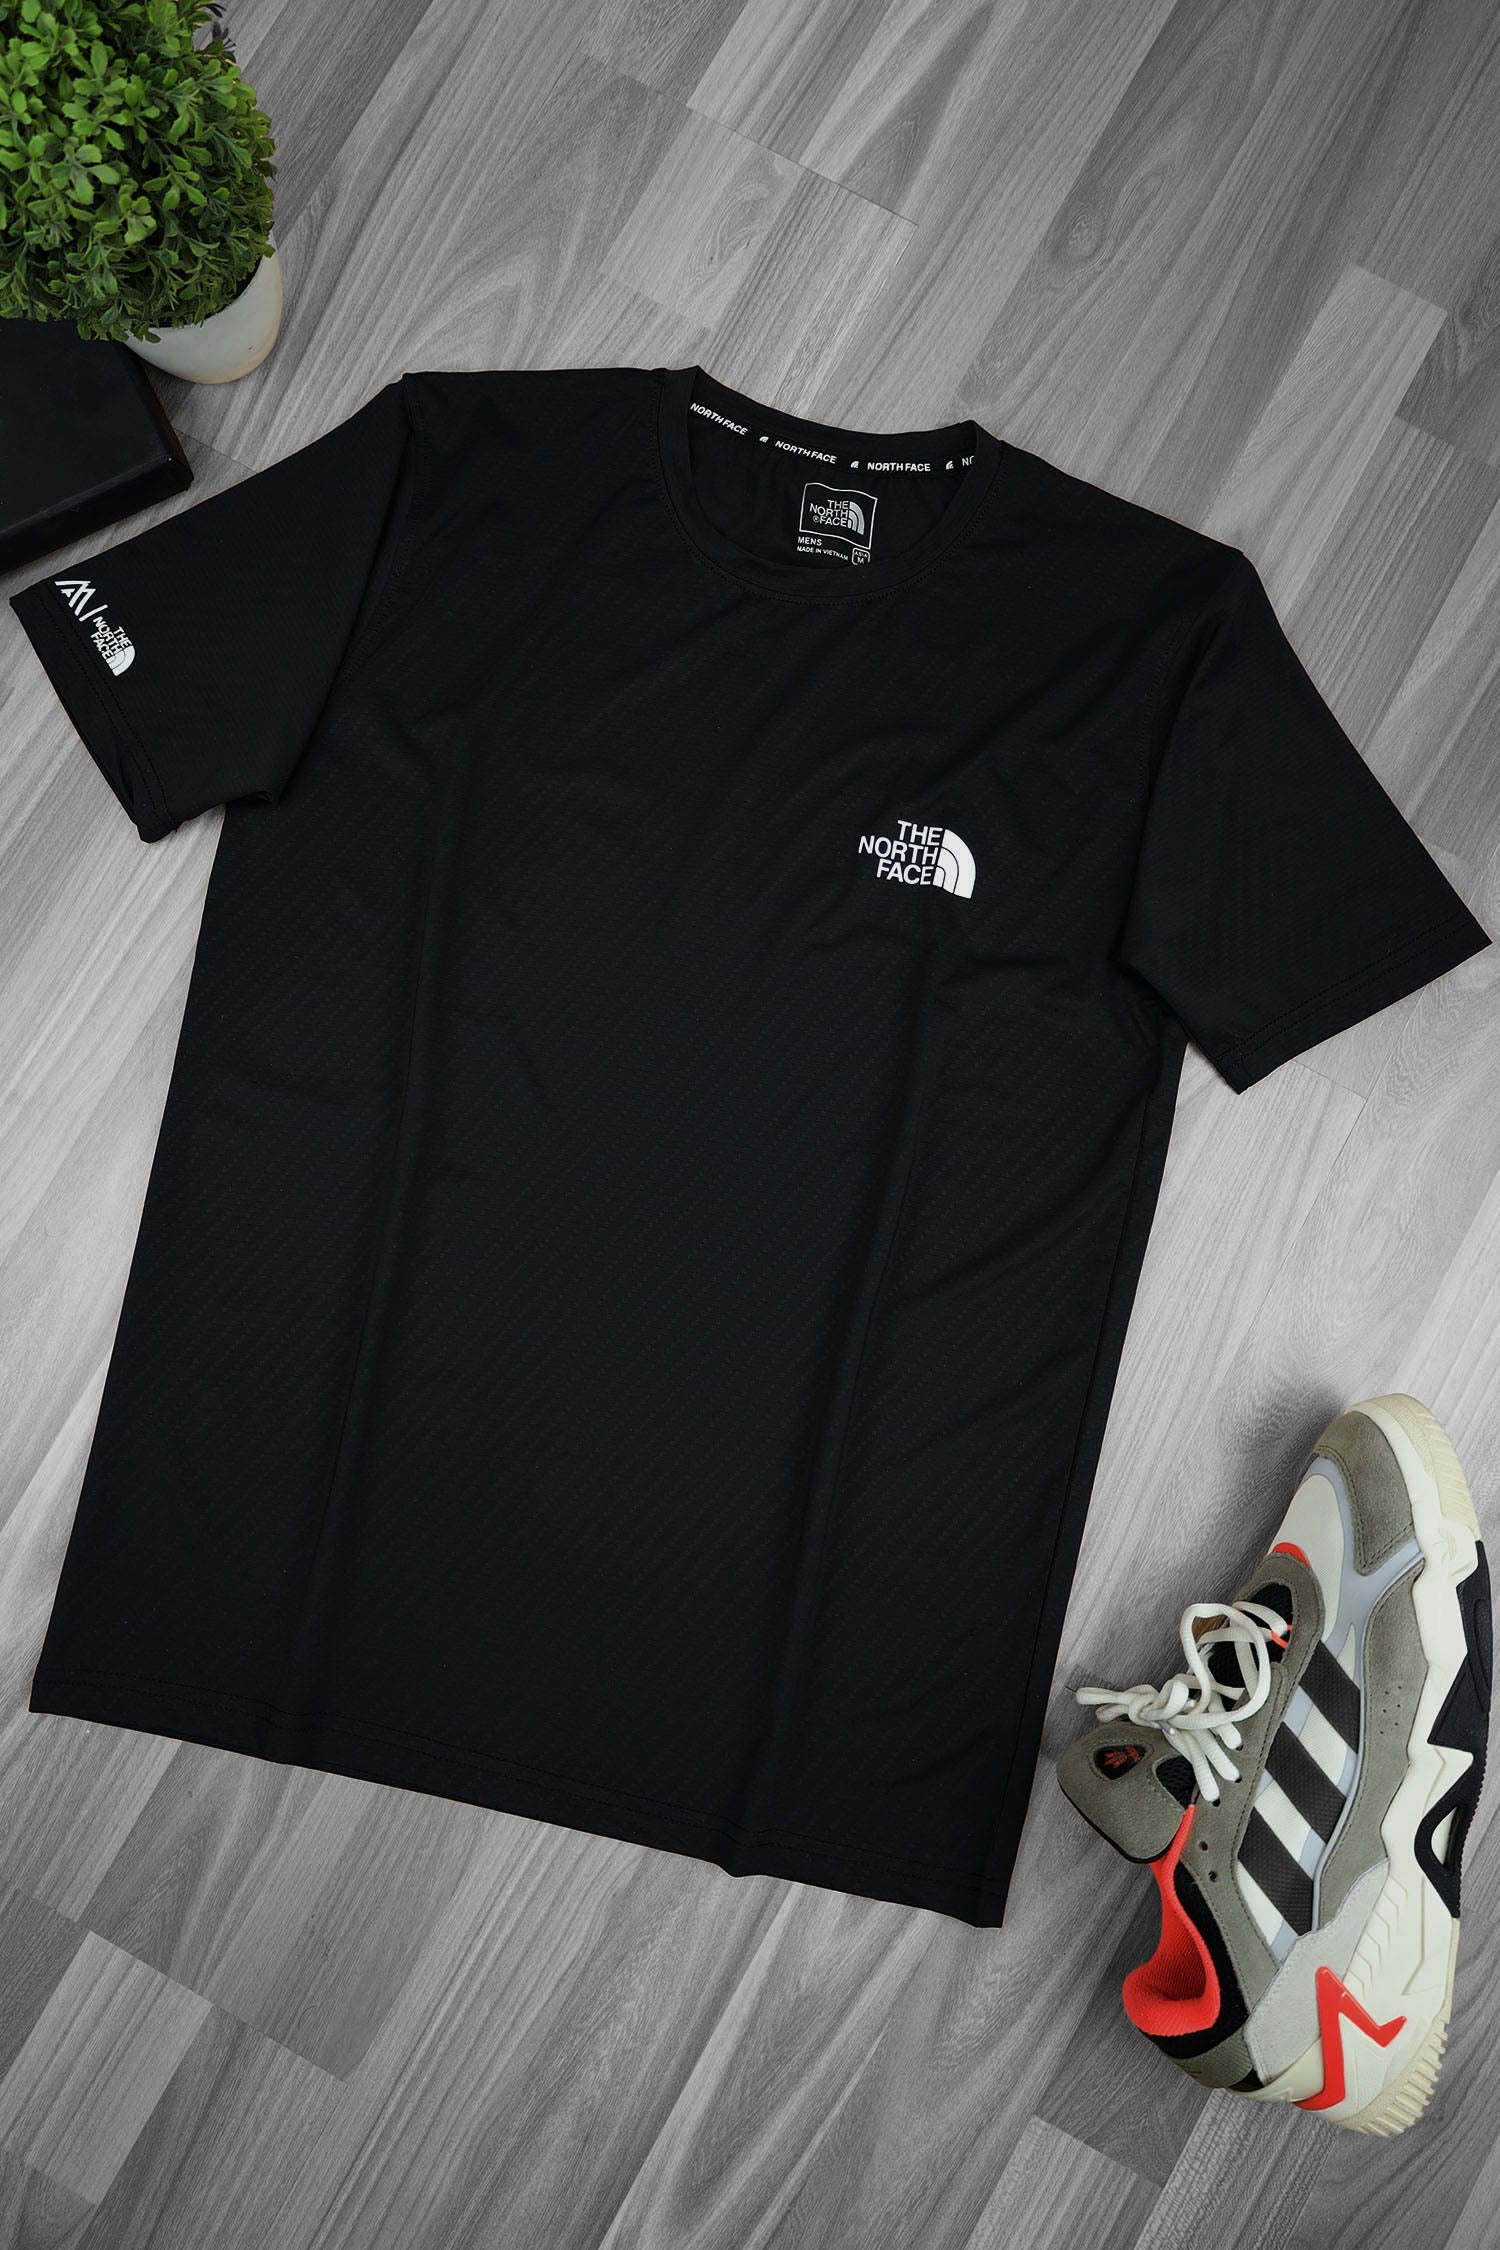 The Nrth Fce Reflector Logo Branded Dry Fit Tee